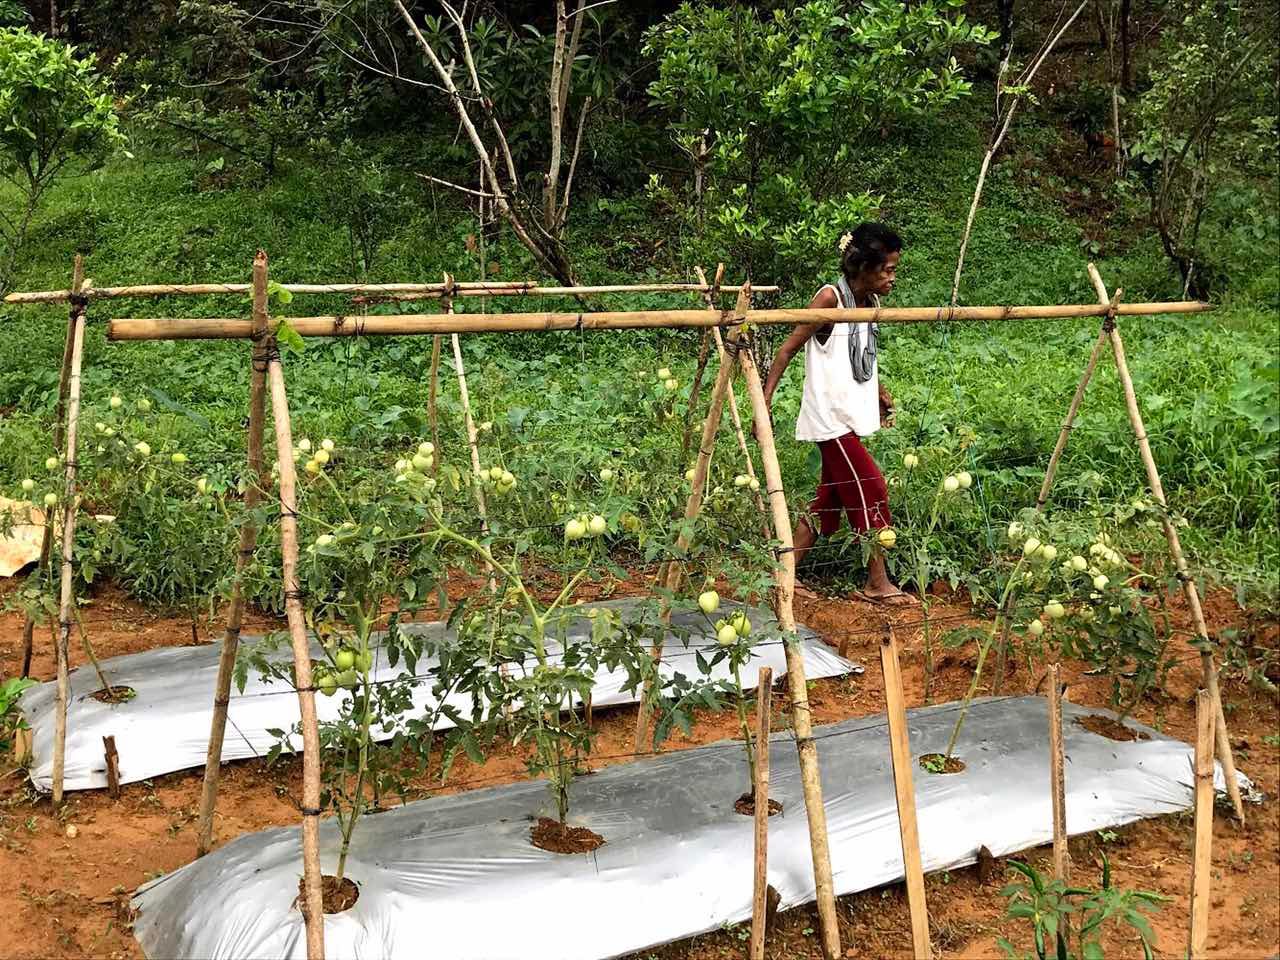 Mangyan mothers learn farming skills to help community be self-sufficient